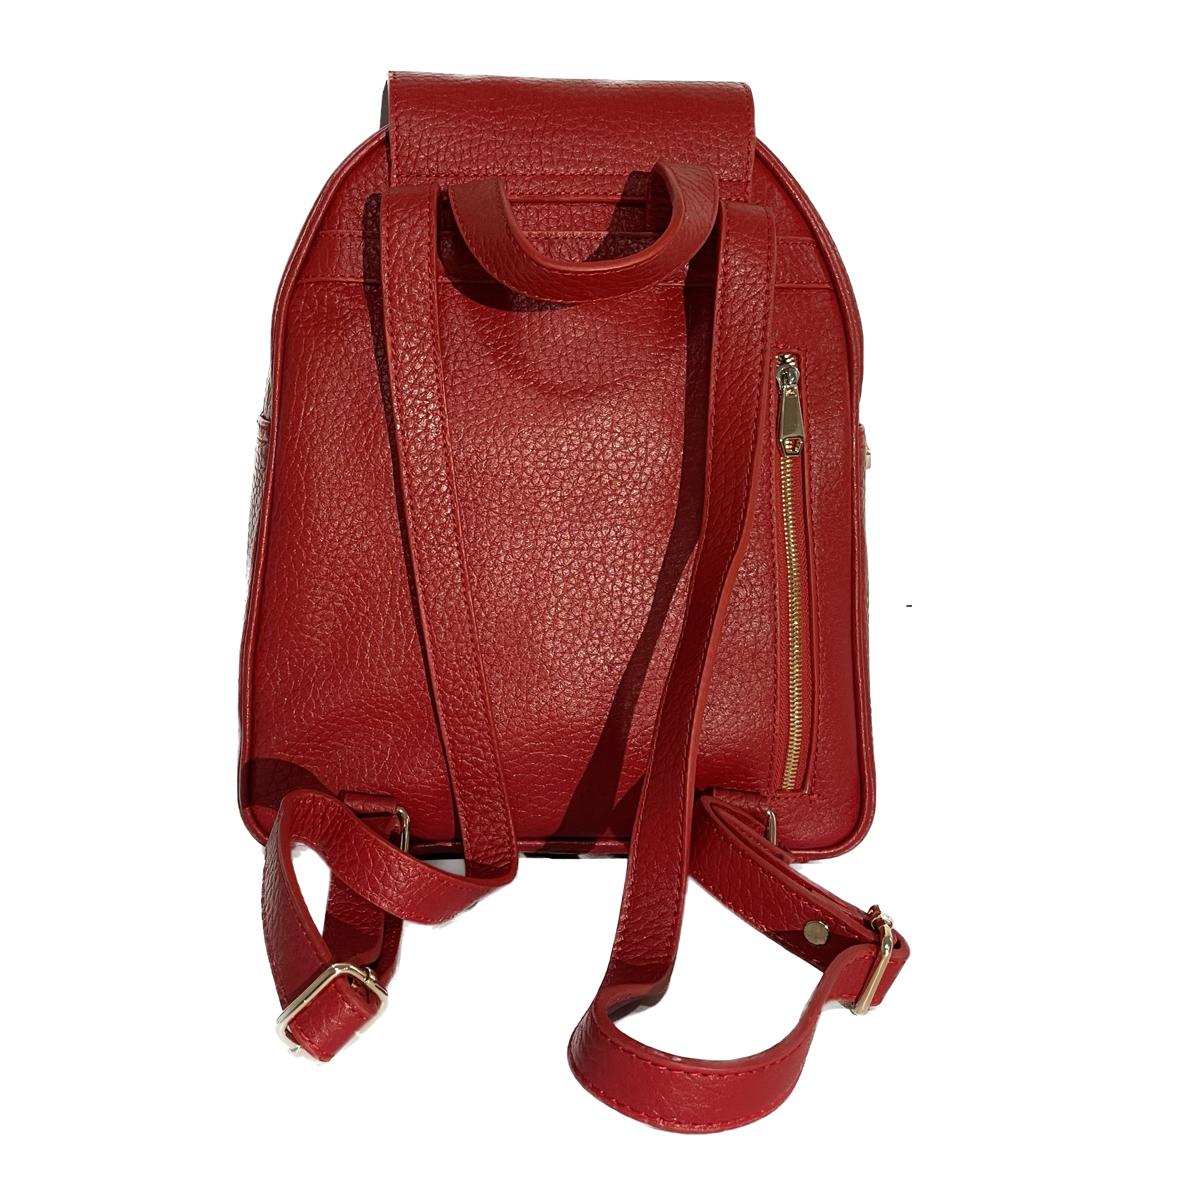 LeatherLuxe - Red Leather Women's Backpack Genuine leather Designer Premium leather bag for women leather hobo tote messenger bag Leather Accessories Leather Shop Leather Goods